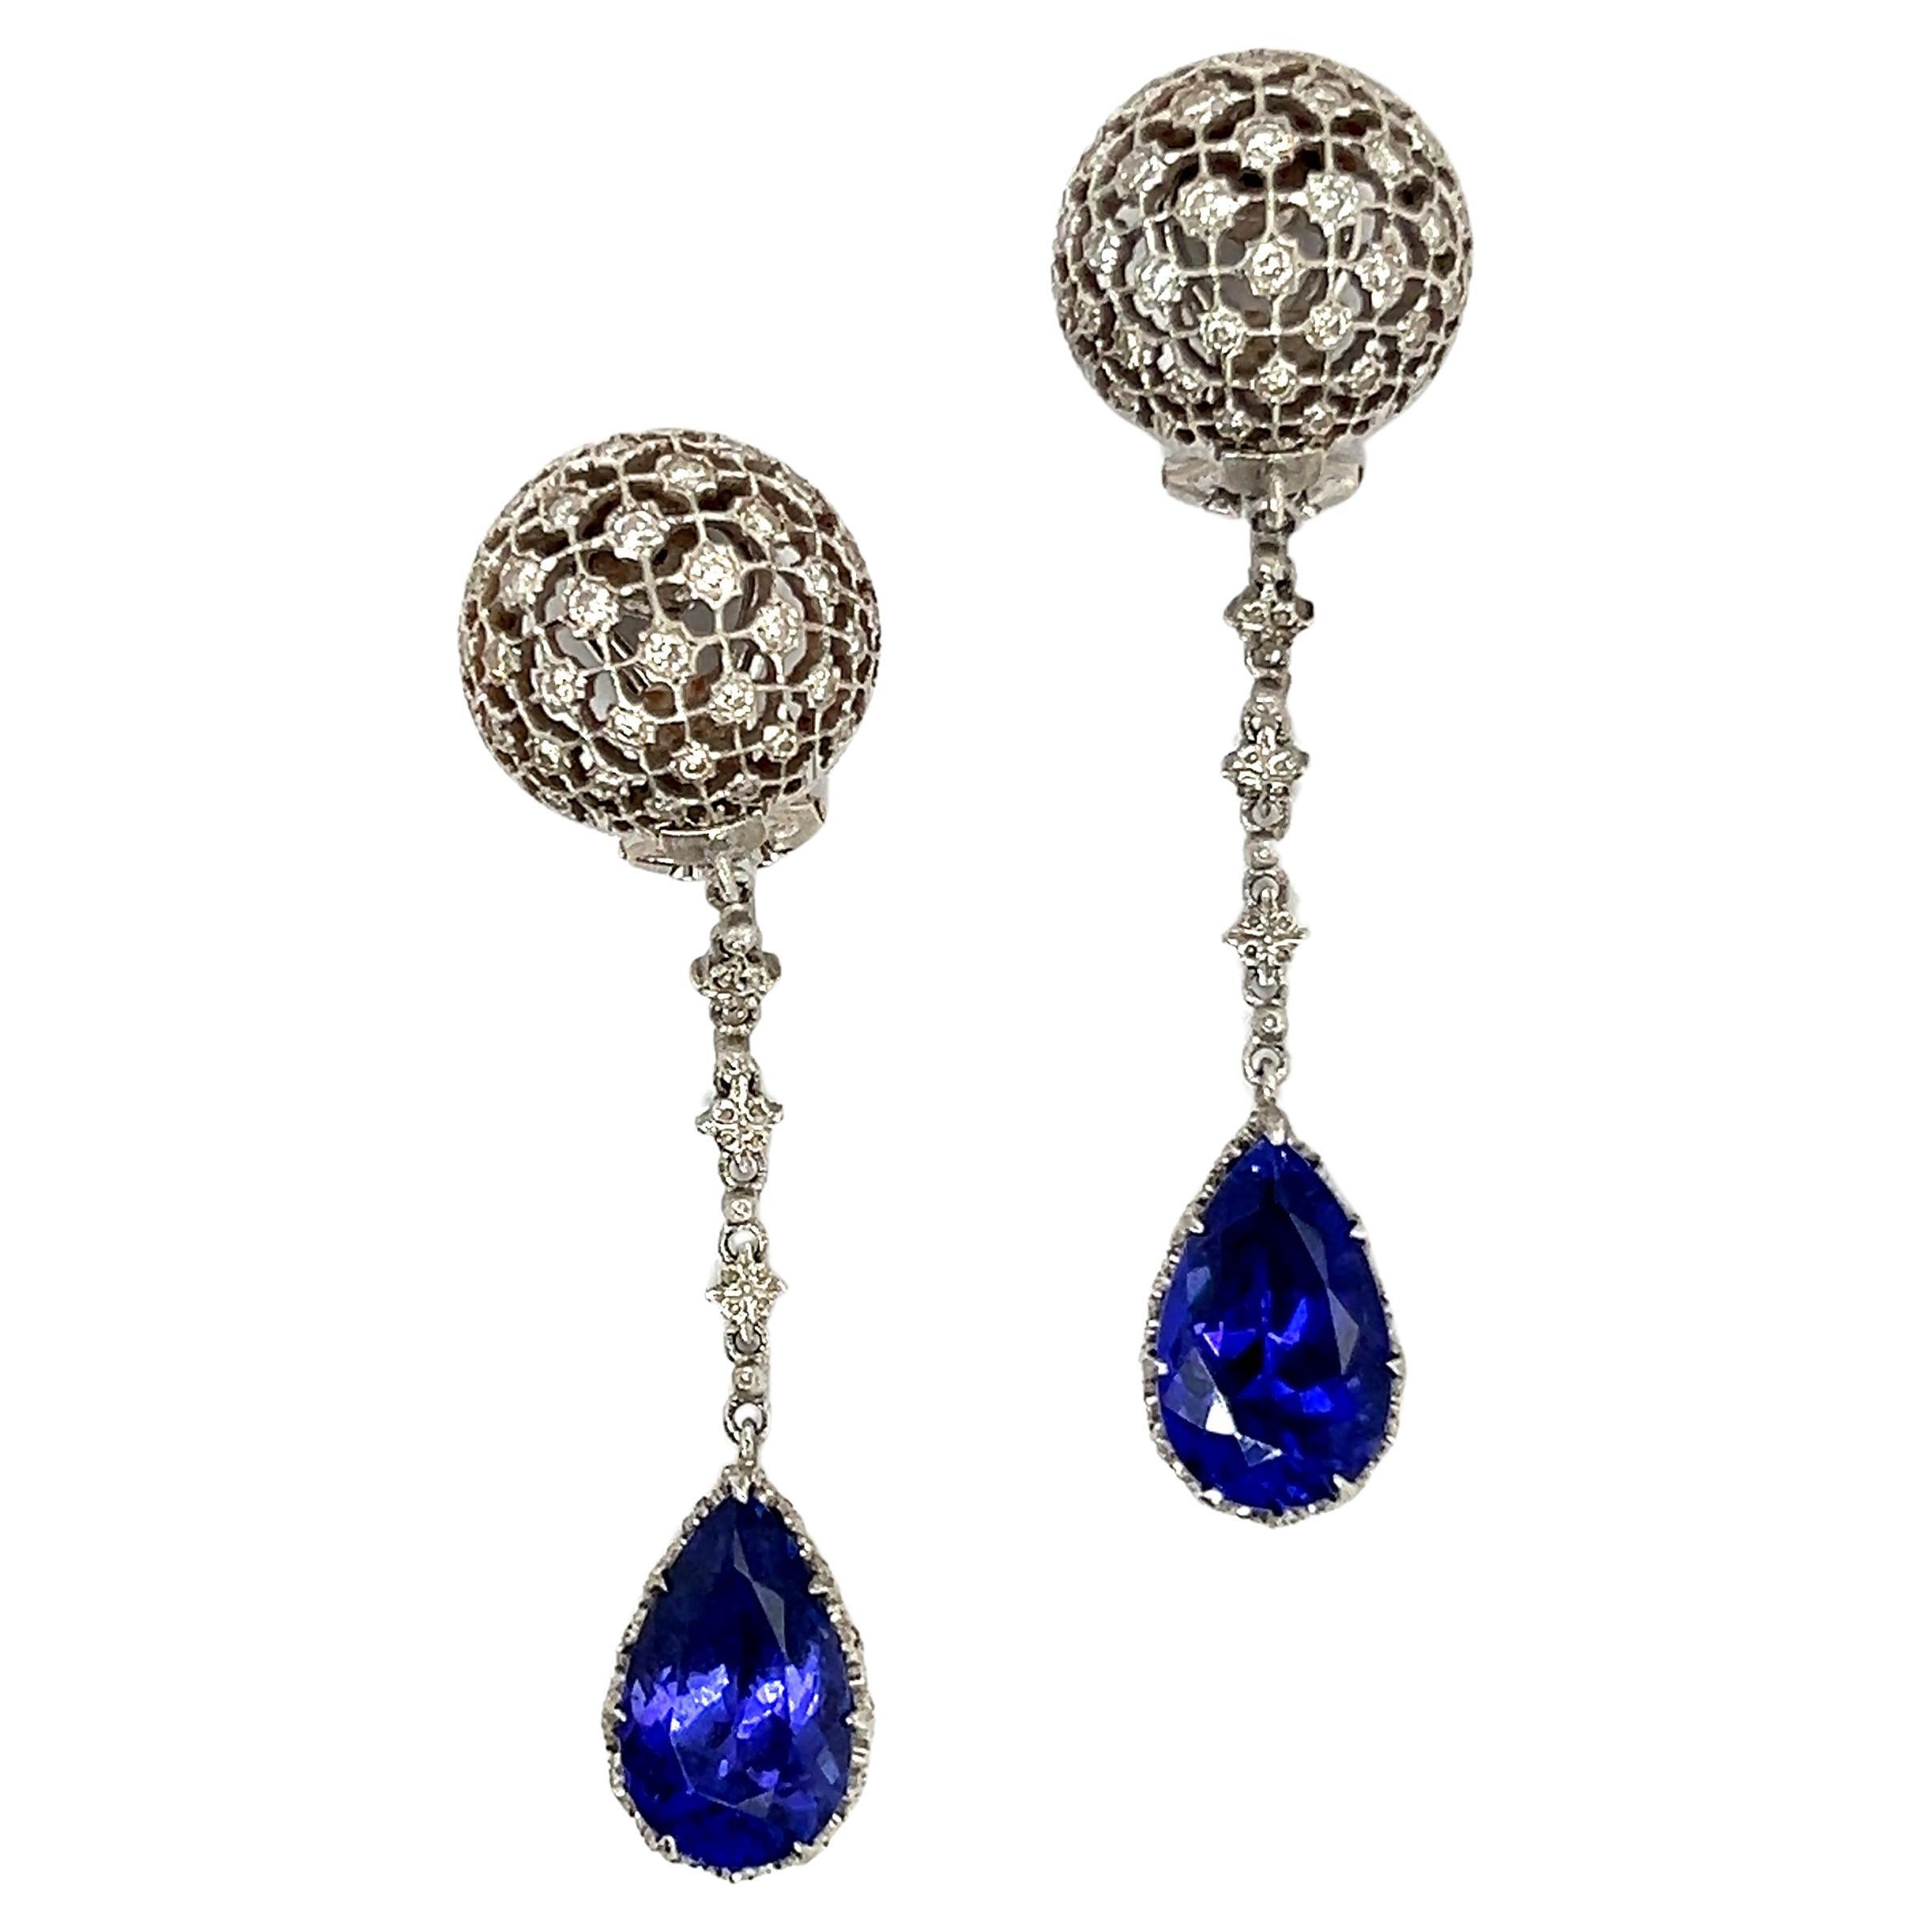 Experience the captivating elegance of Buccellati's extraordinary Tanzanite Earrings with Diamonds, crafted in 18 Karat white gold. Impeccable craftsmanship and meticulous attention to detail define these exquisite earrings. Delicate lace-like